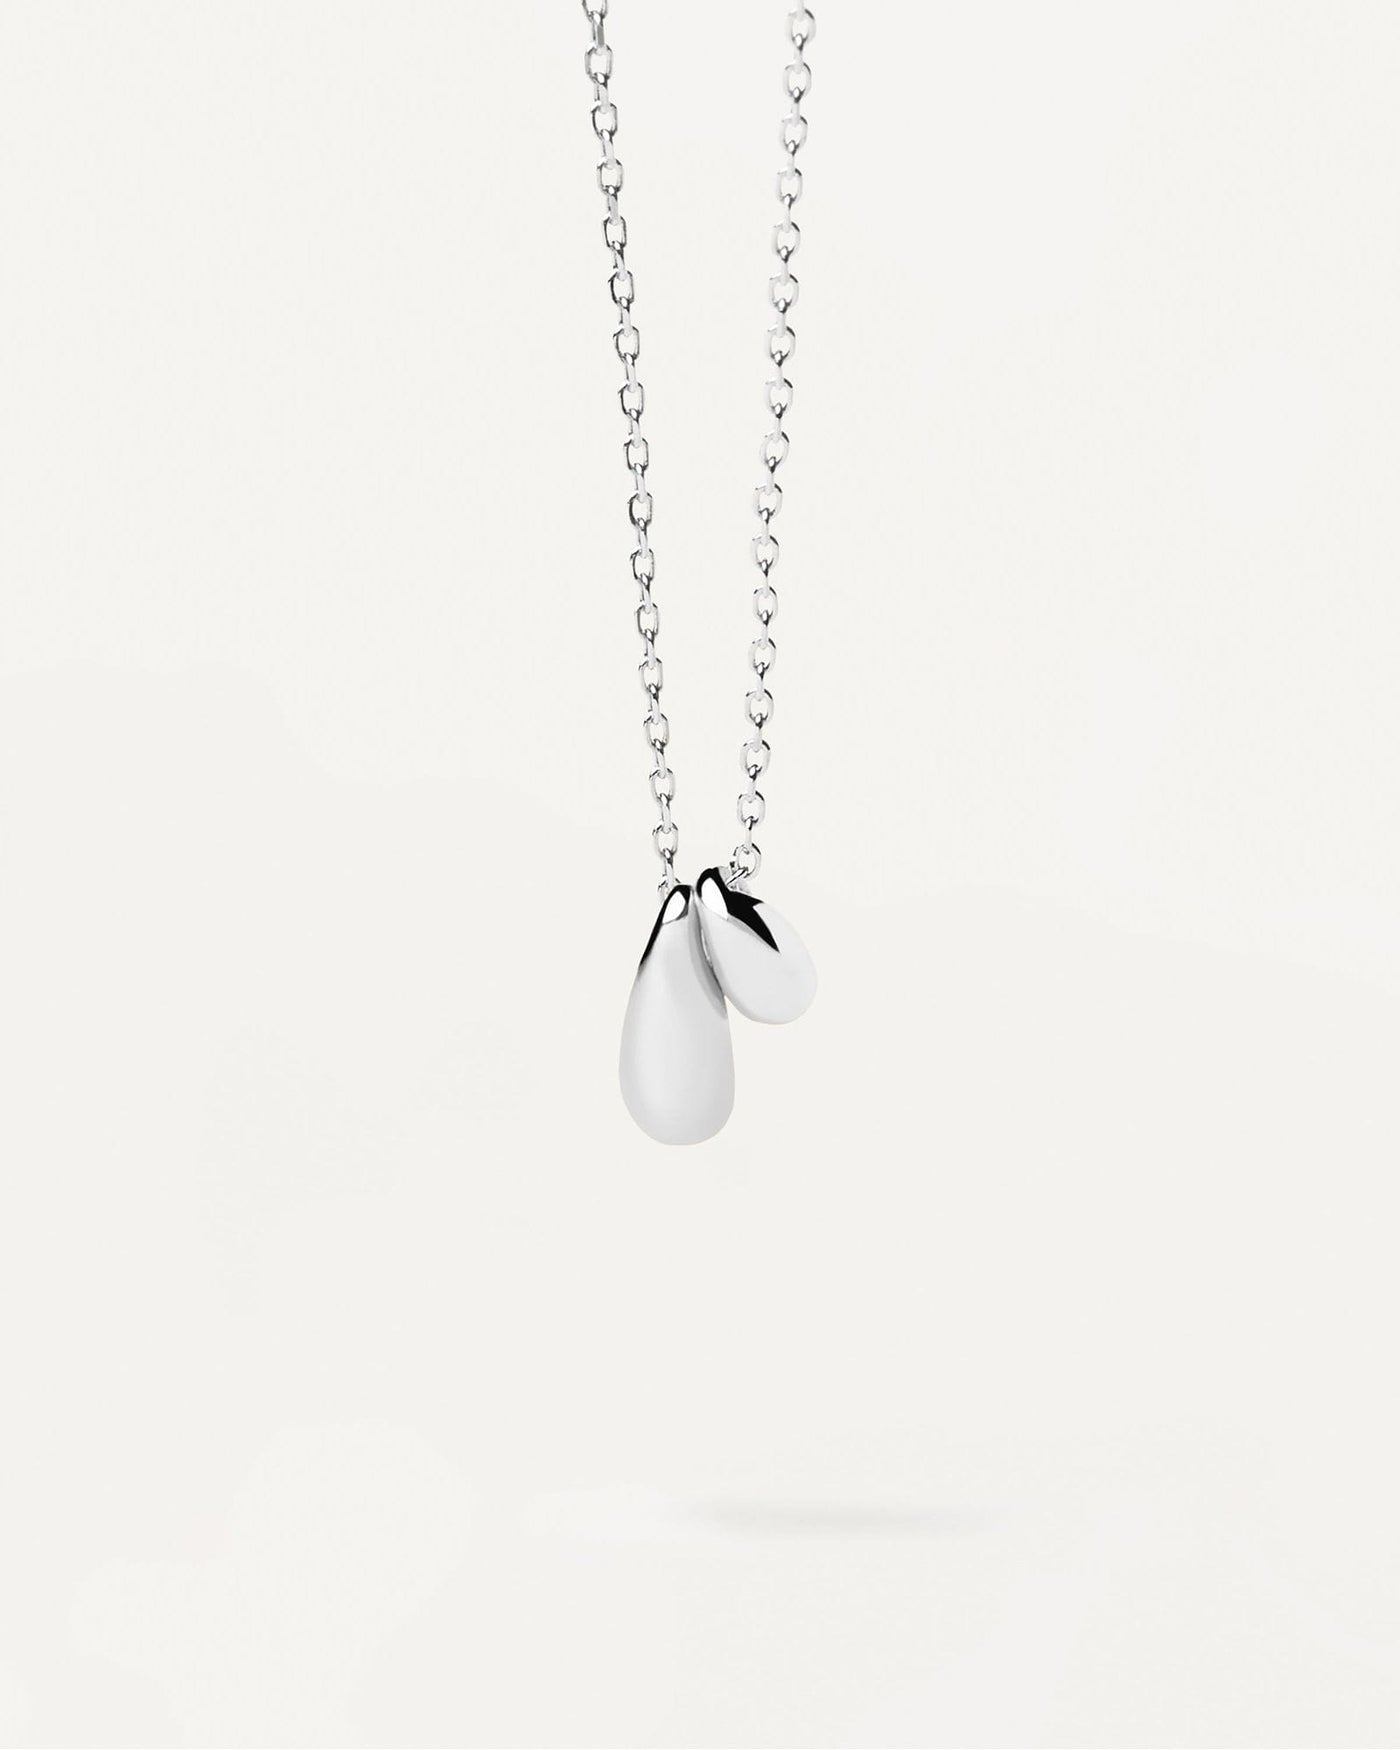 2024 Selection | Sugar Silver Necklace. Sterling silver necklace with two drop pendants. Get the latest arrival from PDPAOLA. Place your order safely and get this Best Seller. Free Shipping.